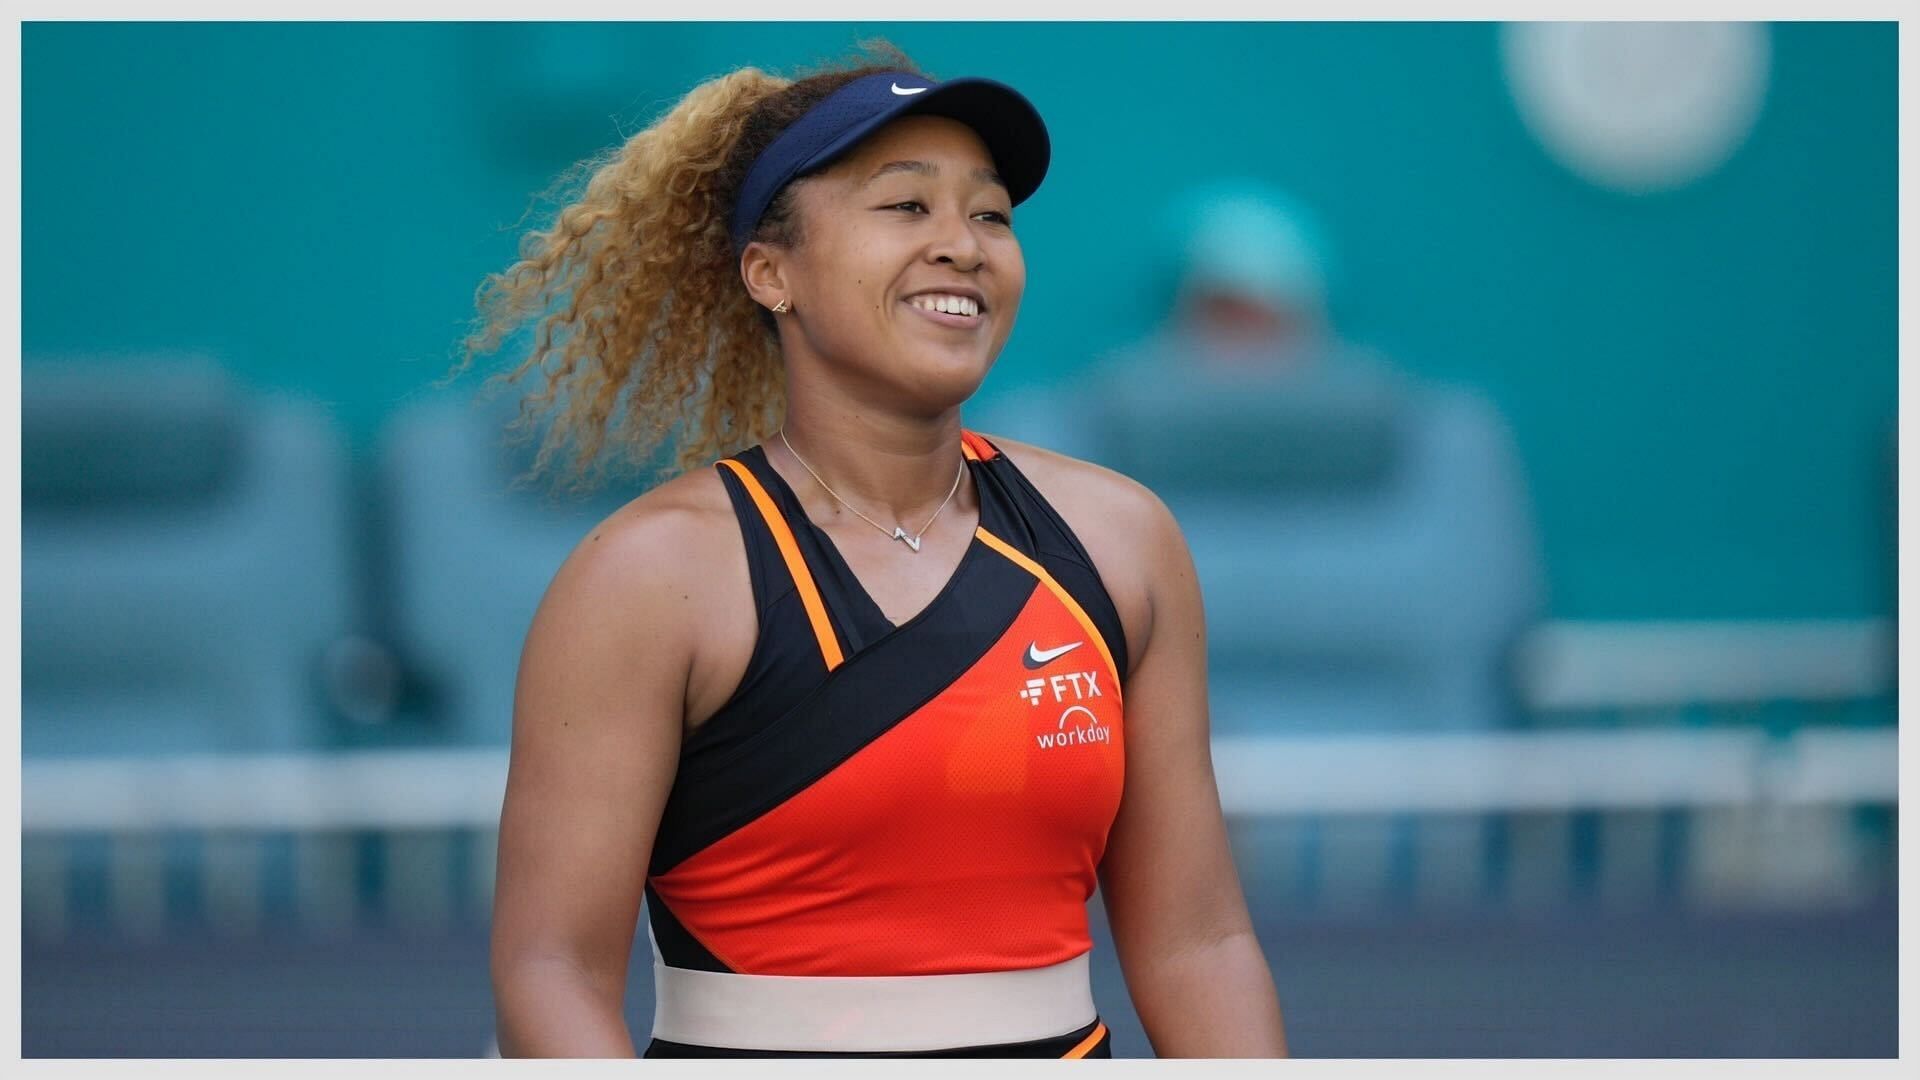 In Pictures: Naomi Osaka shares highlights of fun day spent at the ocean, goes jet skiing & rides dirt bikes